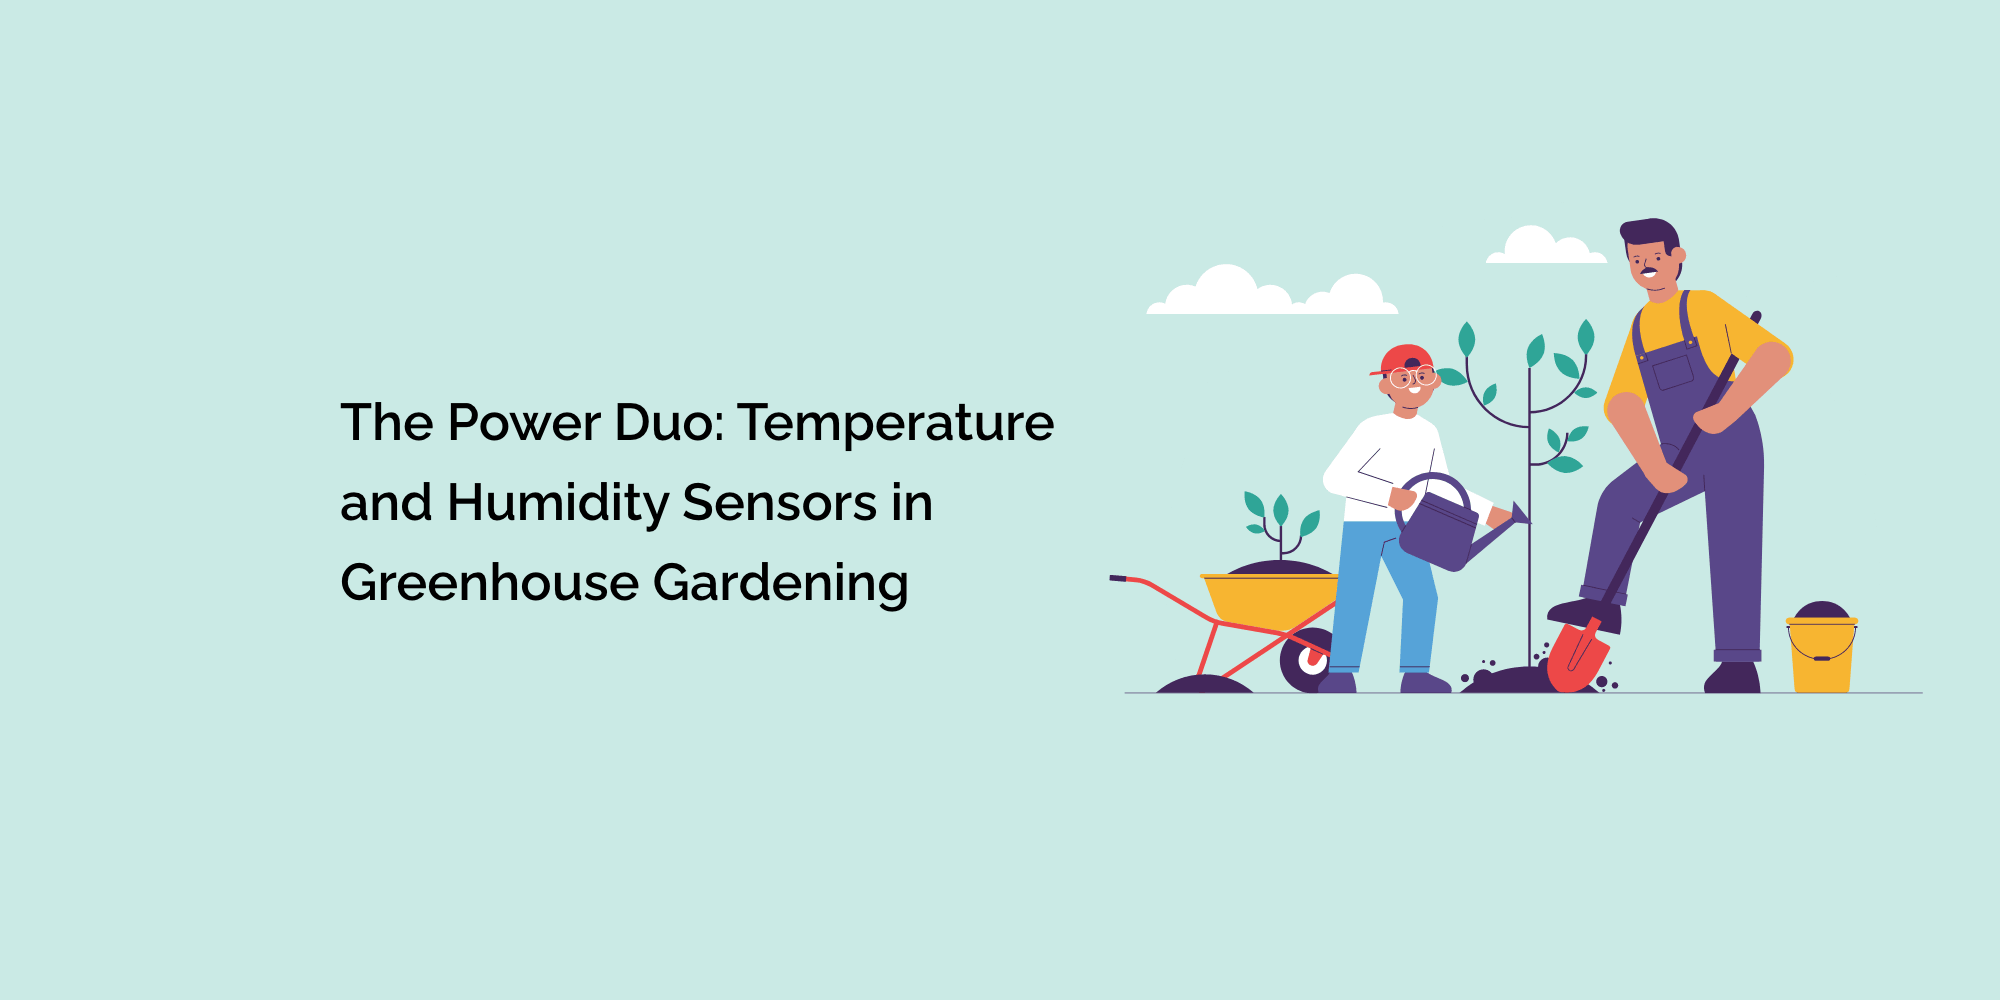 The Power Duo: Temperature and Humidity Sensors in Greenhouse Gardening